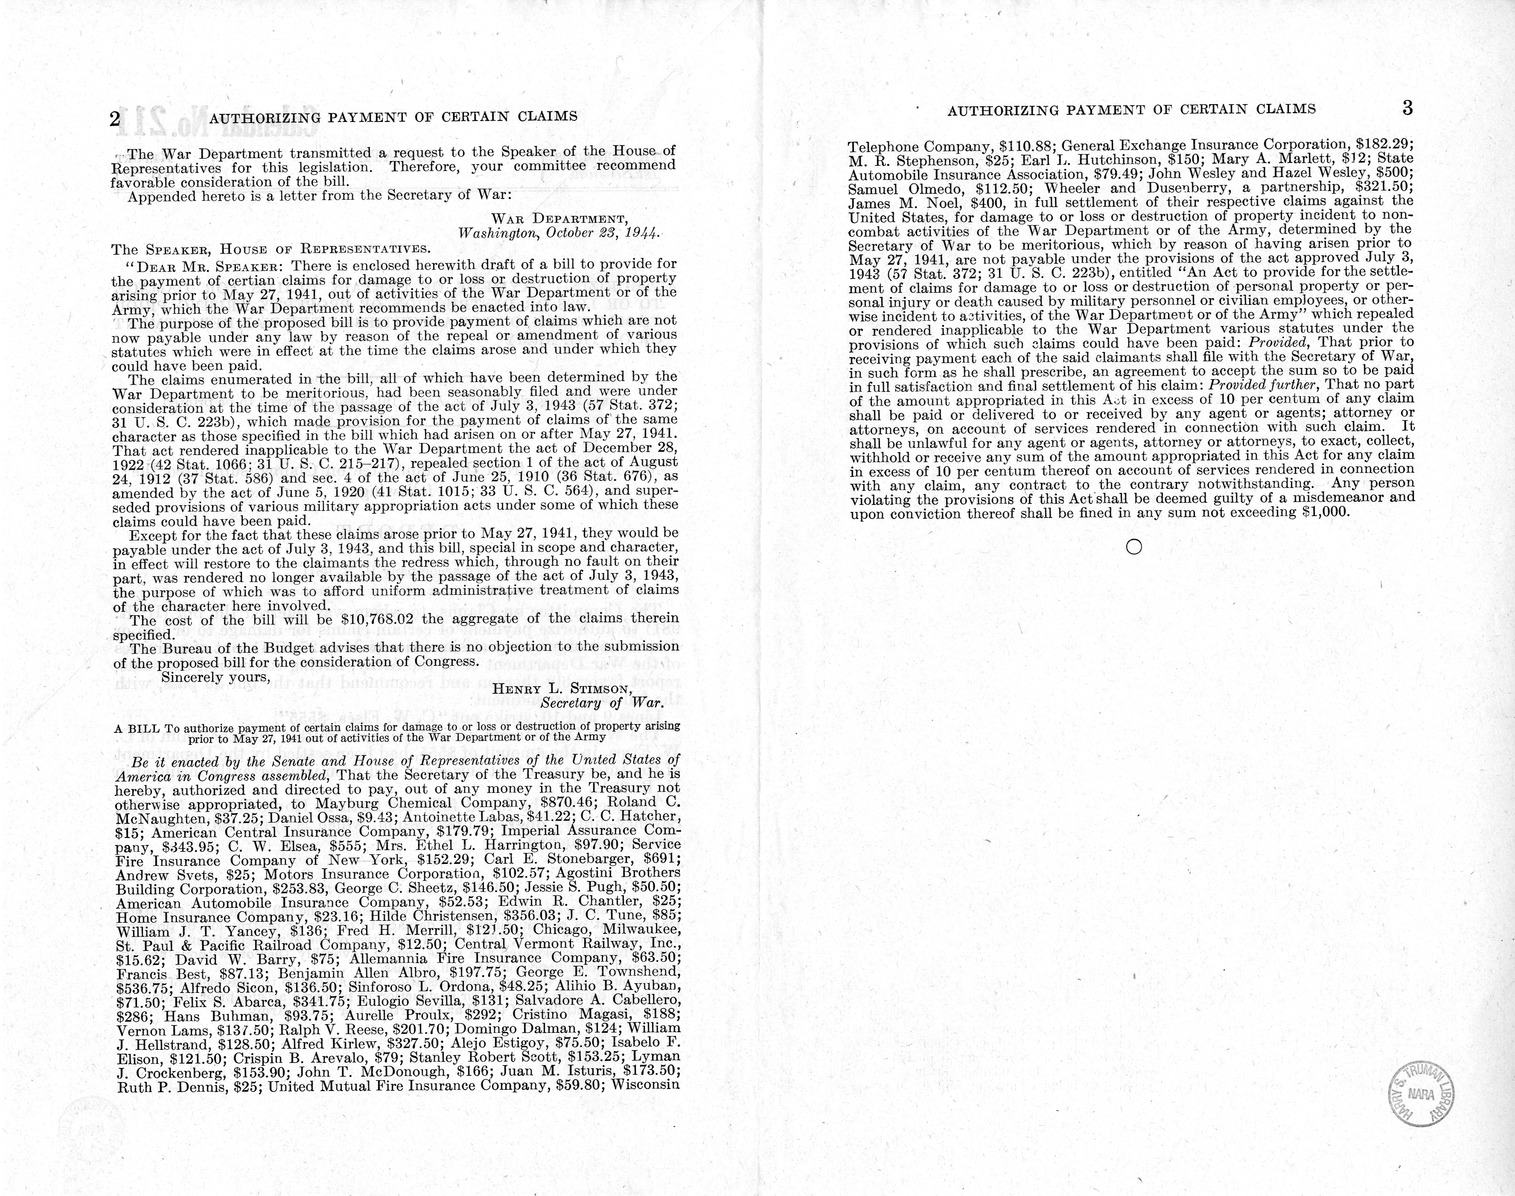 Memorandum from Frederick J. Bailey to M. C. Latta, H.R. 981, To Authorize Payment of Certain Claims for Damage to or Loss or Destruction of Property Arising Prior to May 27, 1941, Out of Activities of the War Department or of the Army, with Attachments